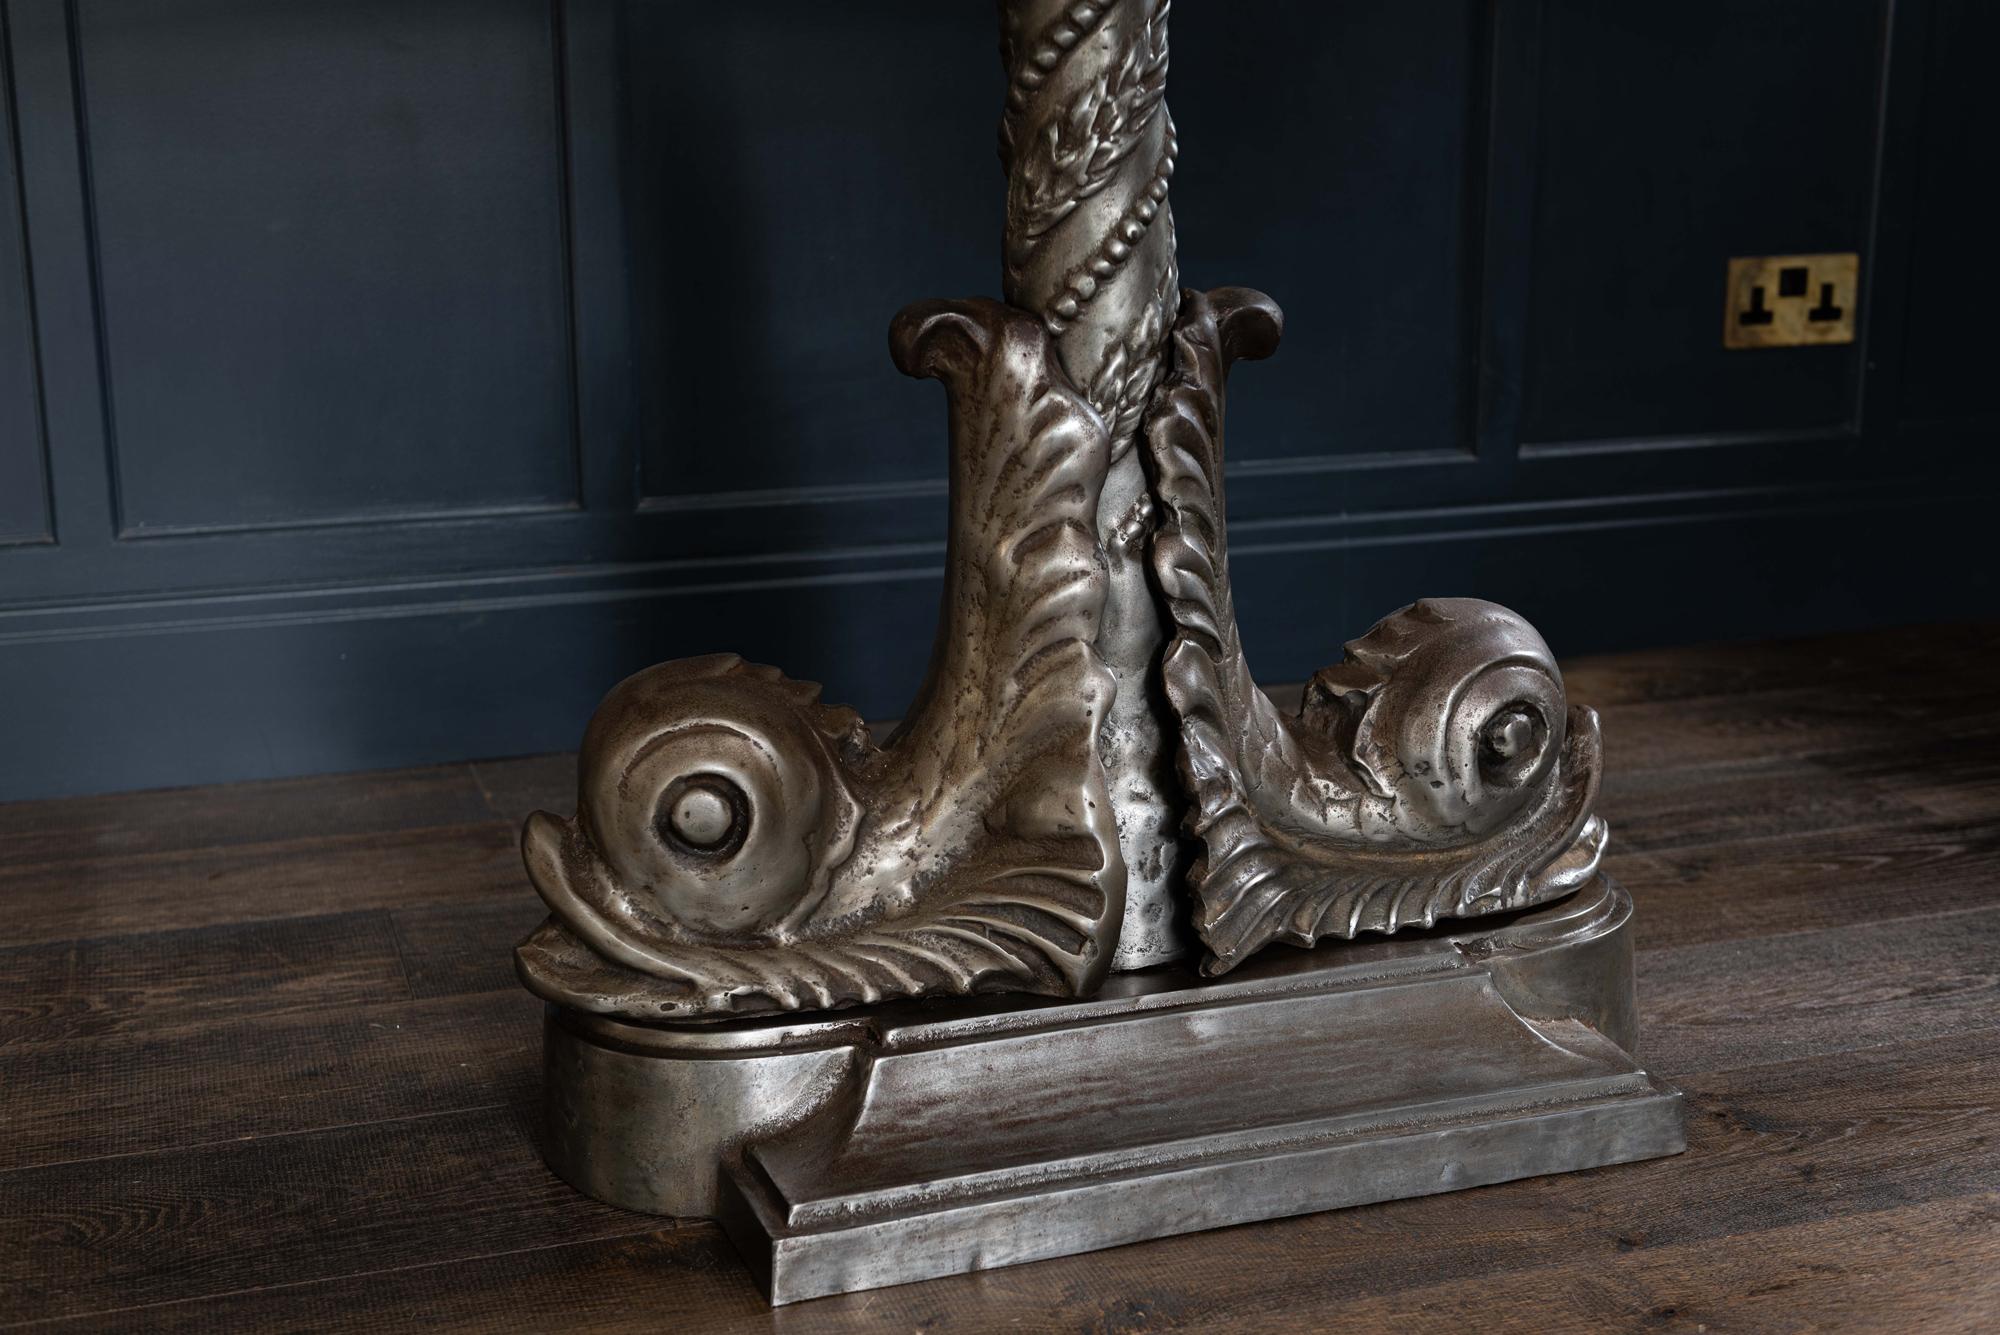 London Embankment Cast Iron Sturgeon Table with Rotating Glass Top, circa 1980s For Sale 7